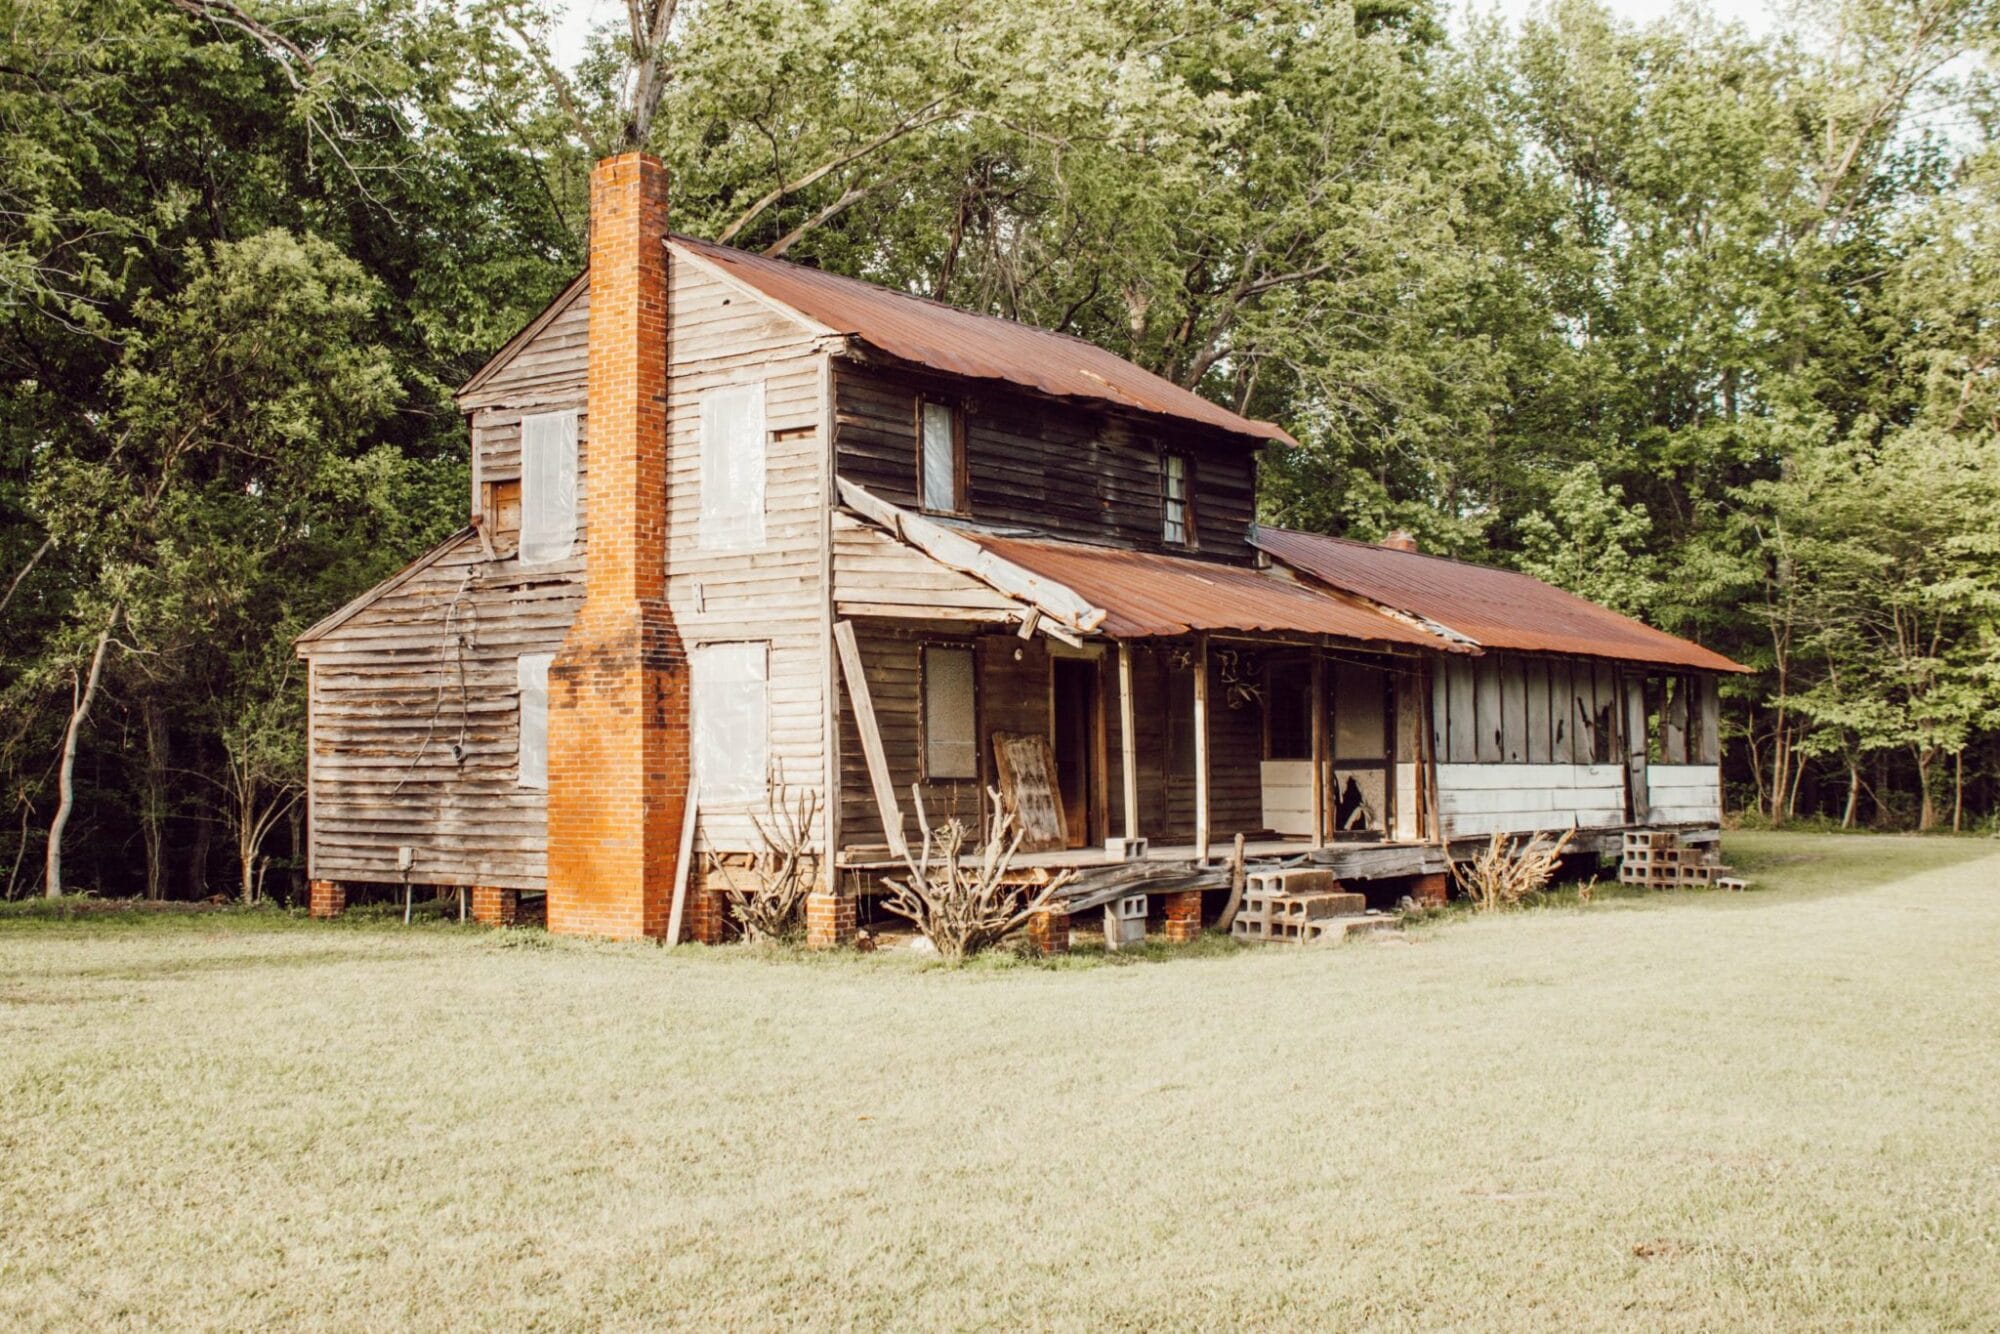 1800's 2 story farmhouse in North Carolina with original wood siding, a brick chimney and a long front porch